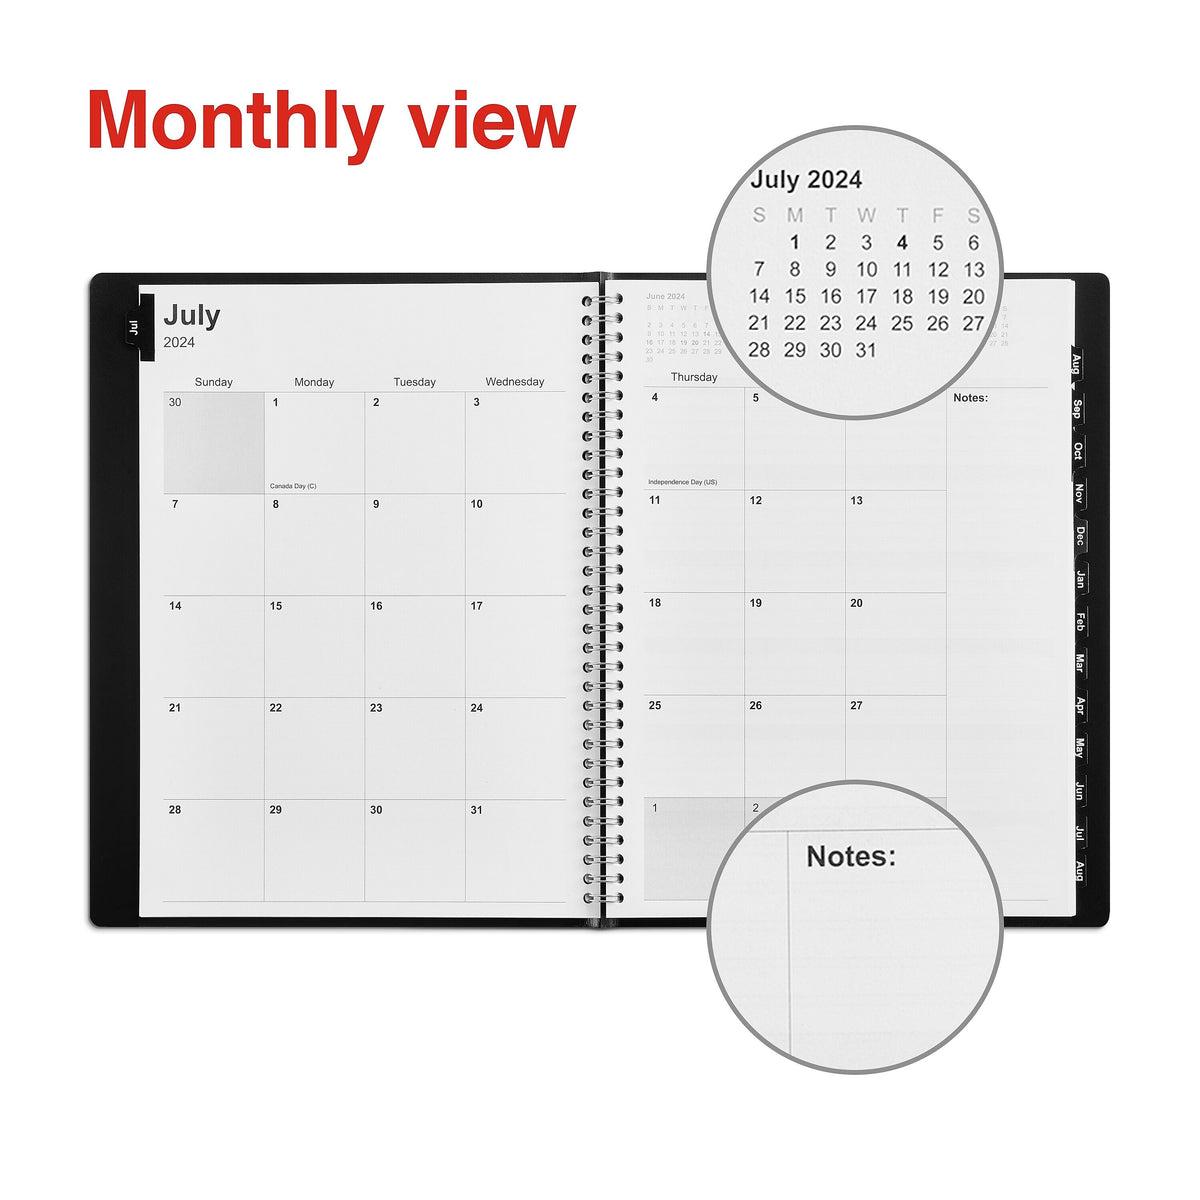 2024-2025 Staples 8" x 11" Academic Weekly & Monthly Planner, Faux Leather Cover, Black